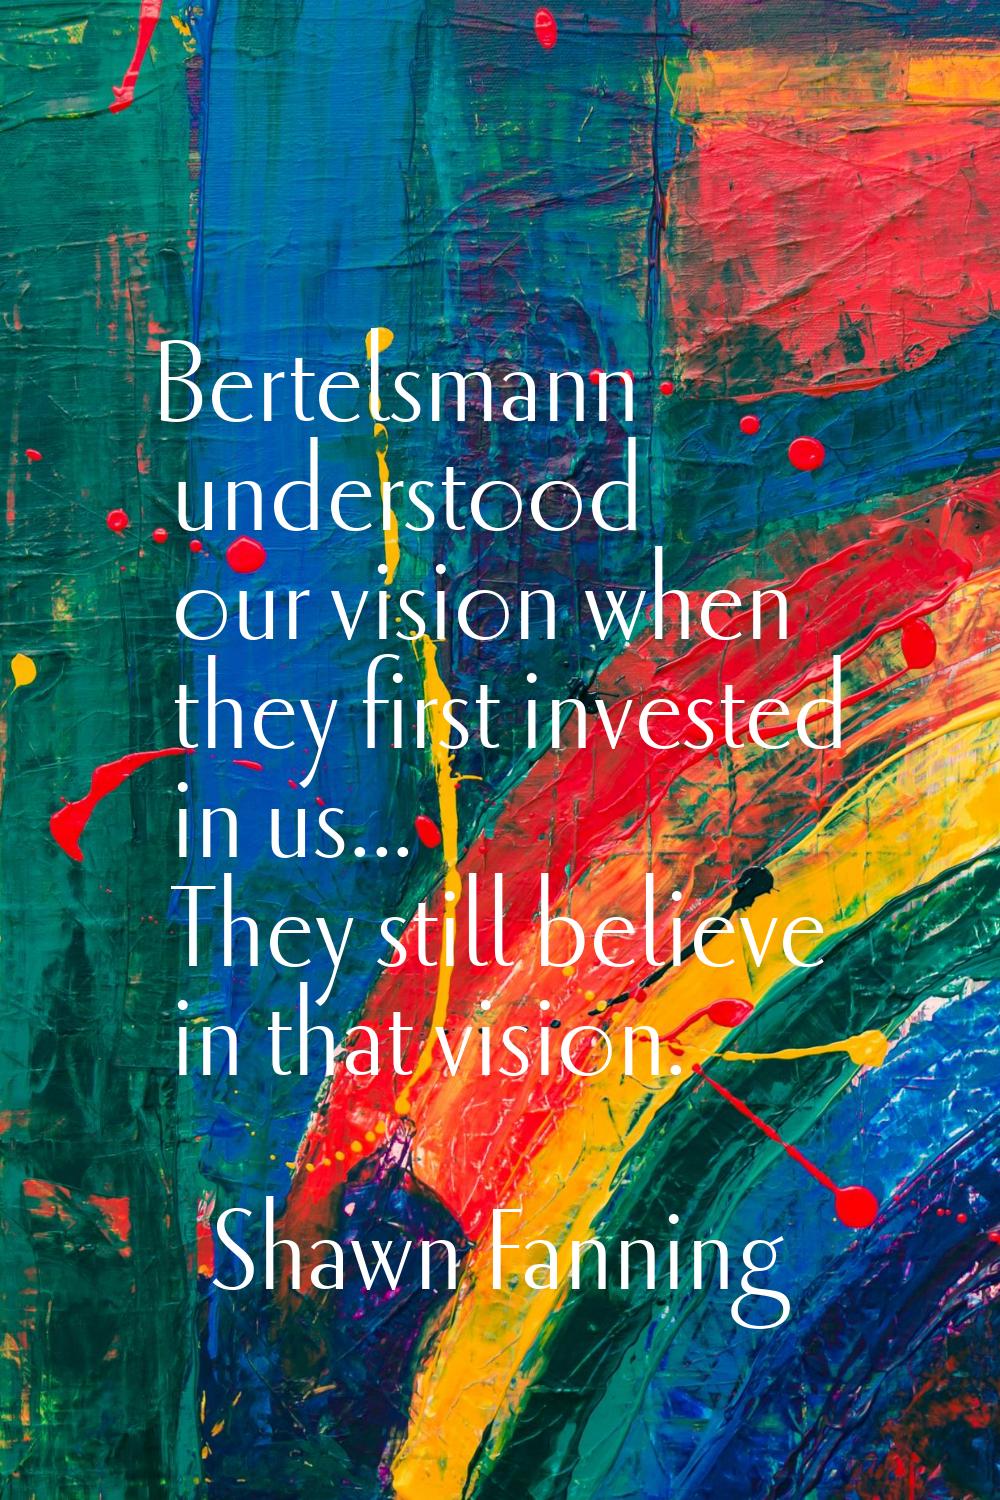 Bertelsmann understood our vision when they first invested in us... They still believe in that visi